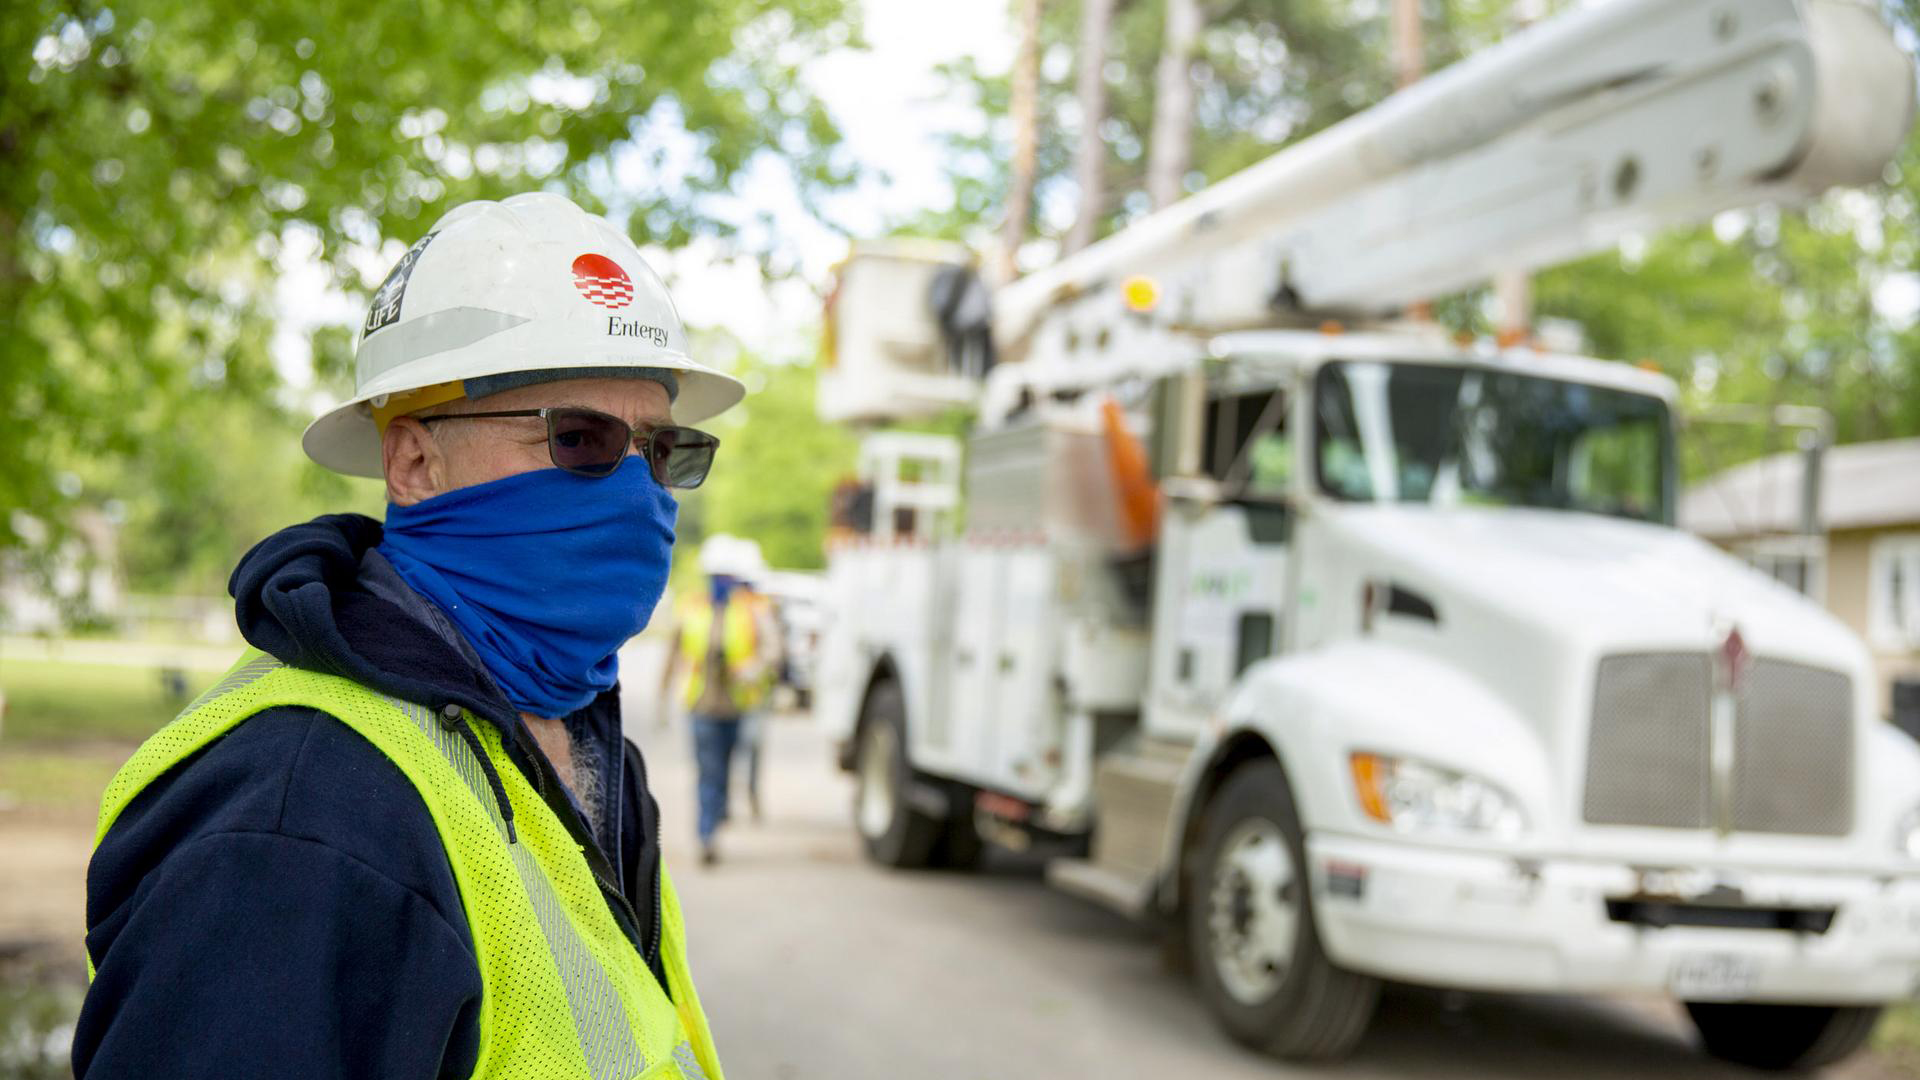 Maintaining social distancing and wearing protective masks adds to the challenge of restoring power to 128,000 customers. This scene was in Smackover Tuesday. 